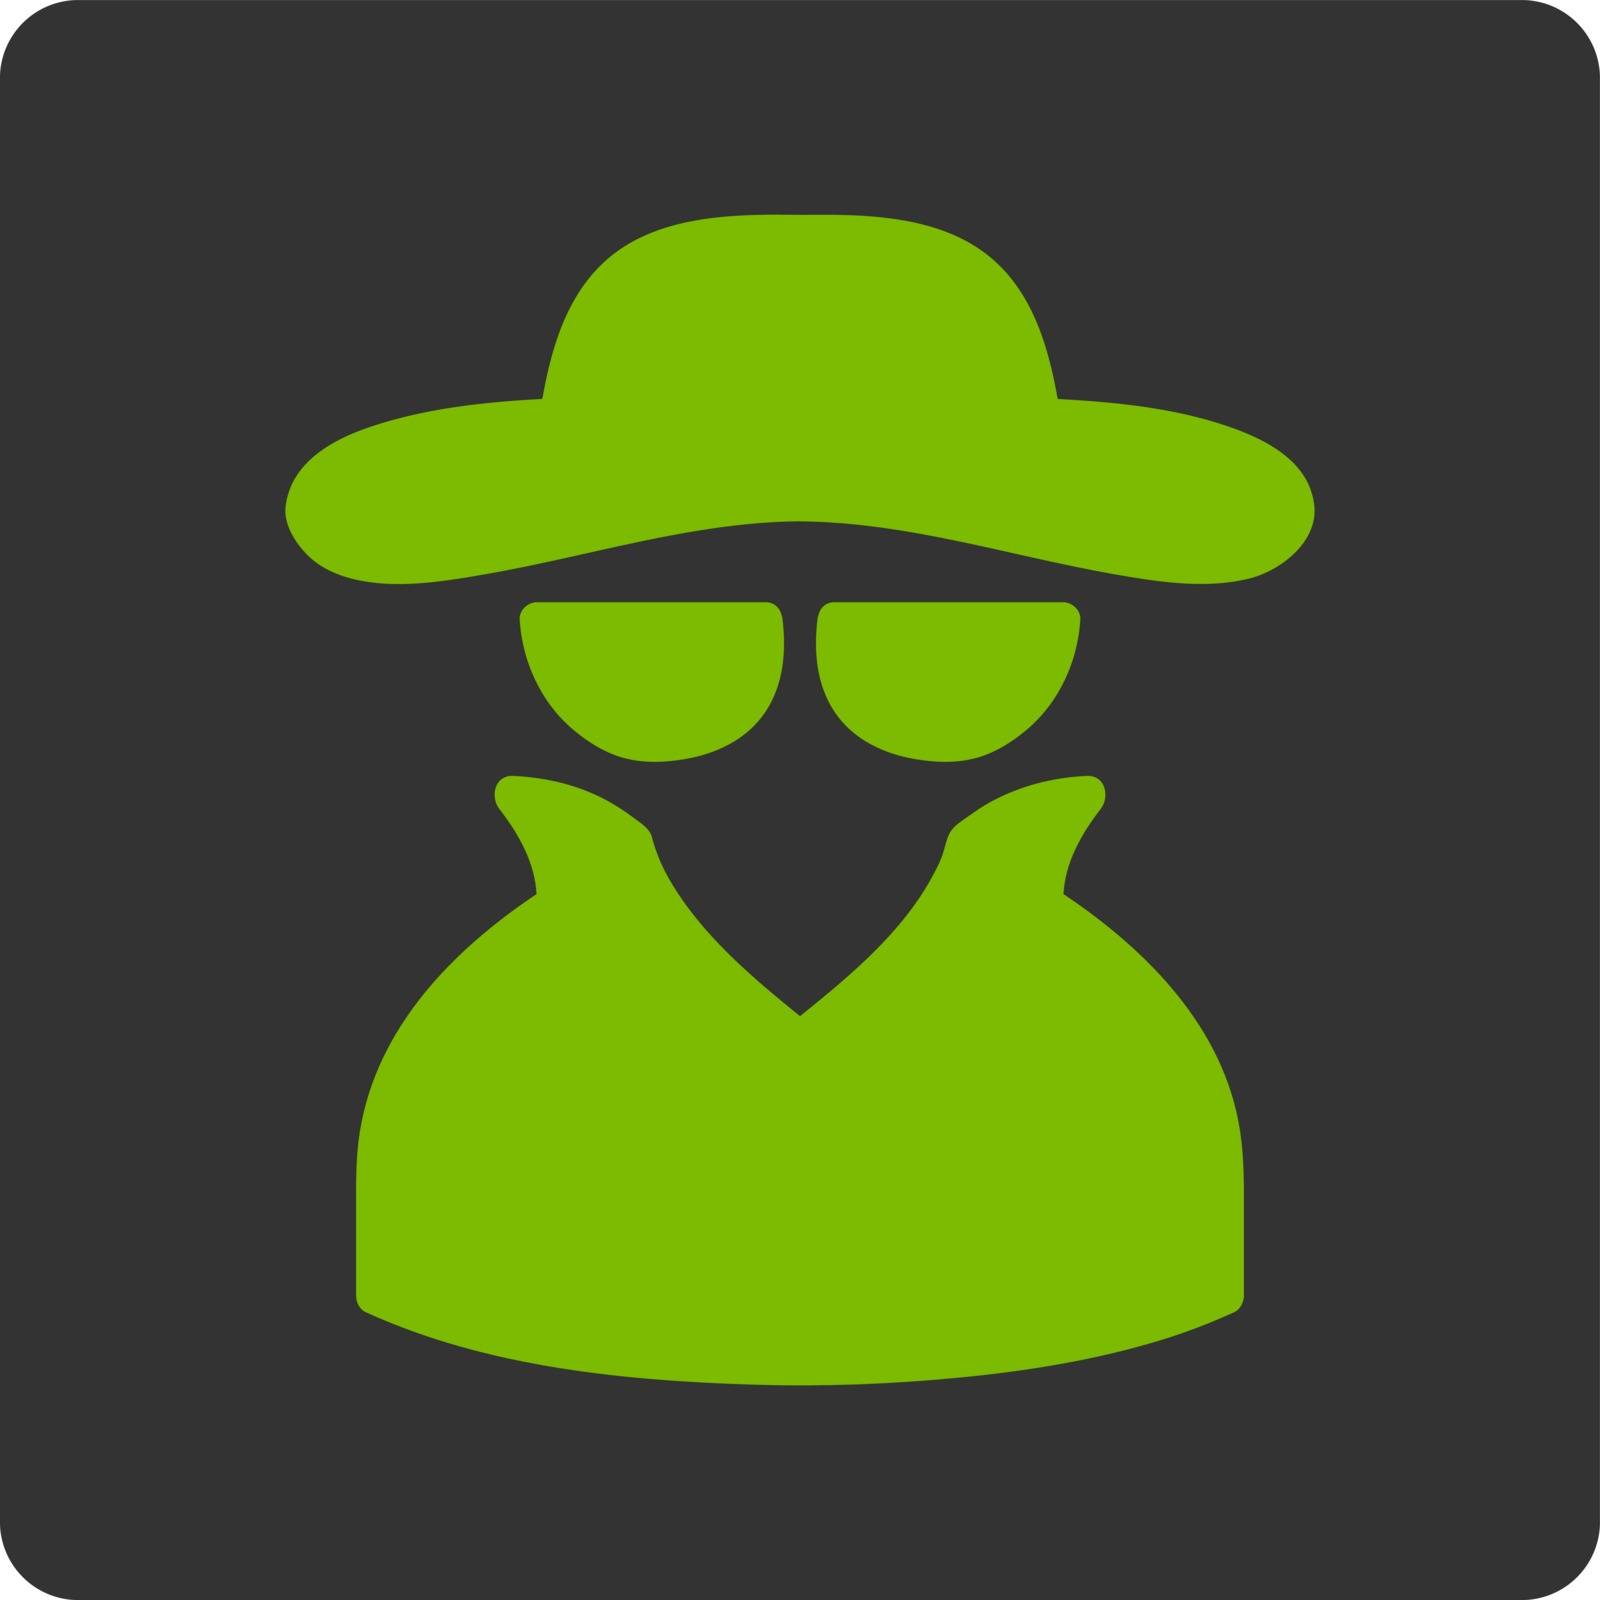 Spy icon. Vector style is eco green and gray colors, flat rounded square button on a white background.